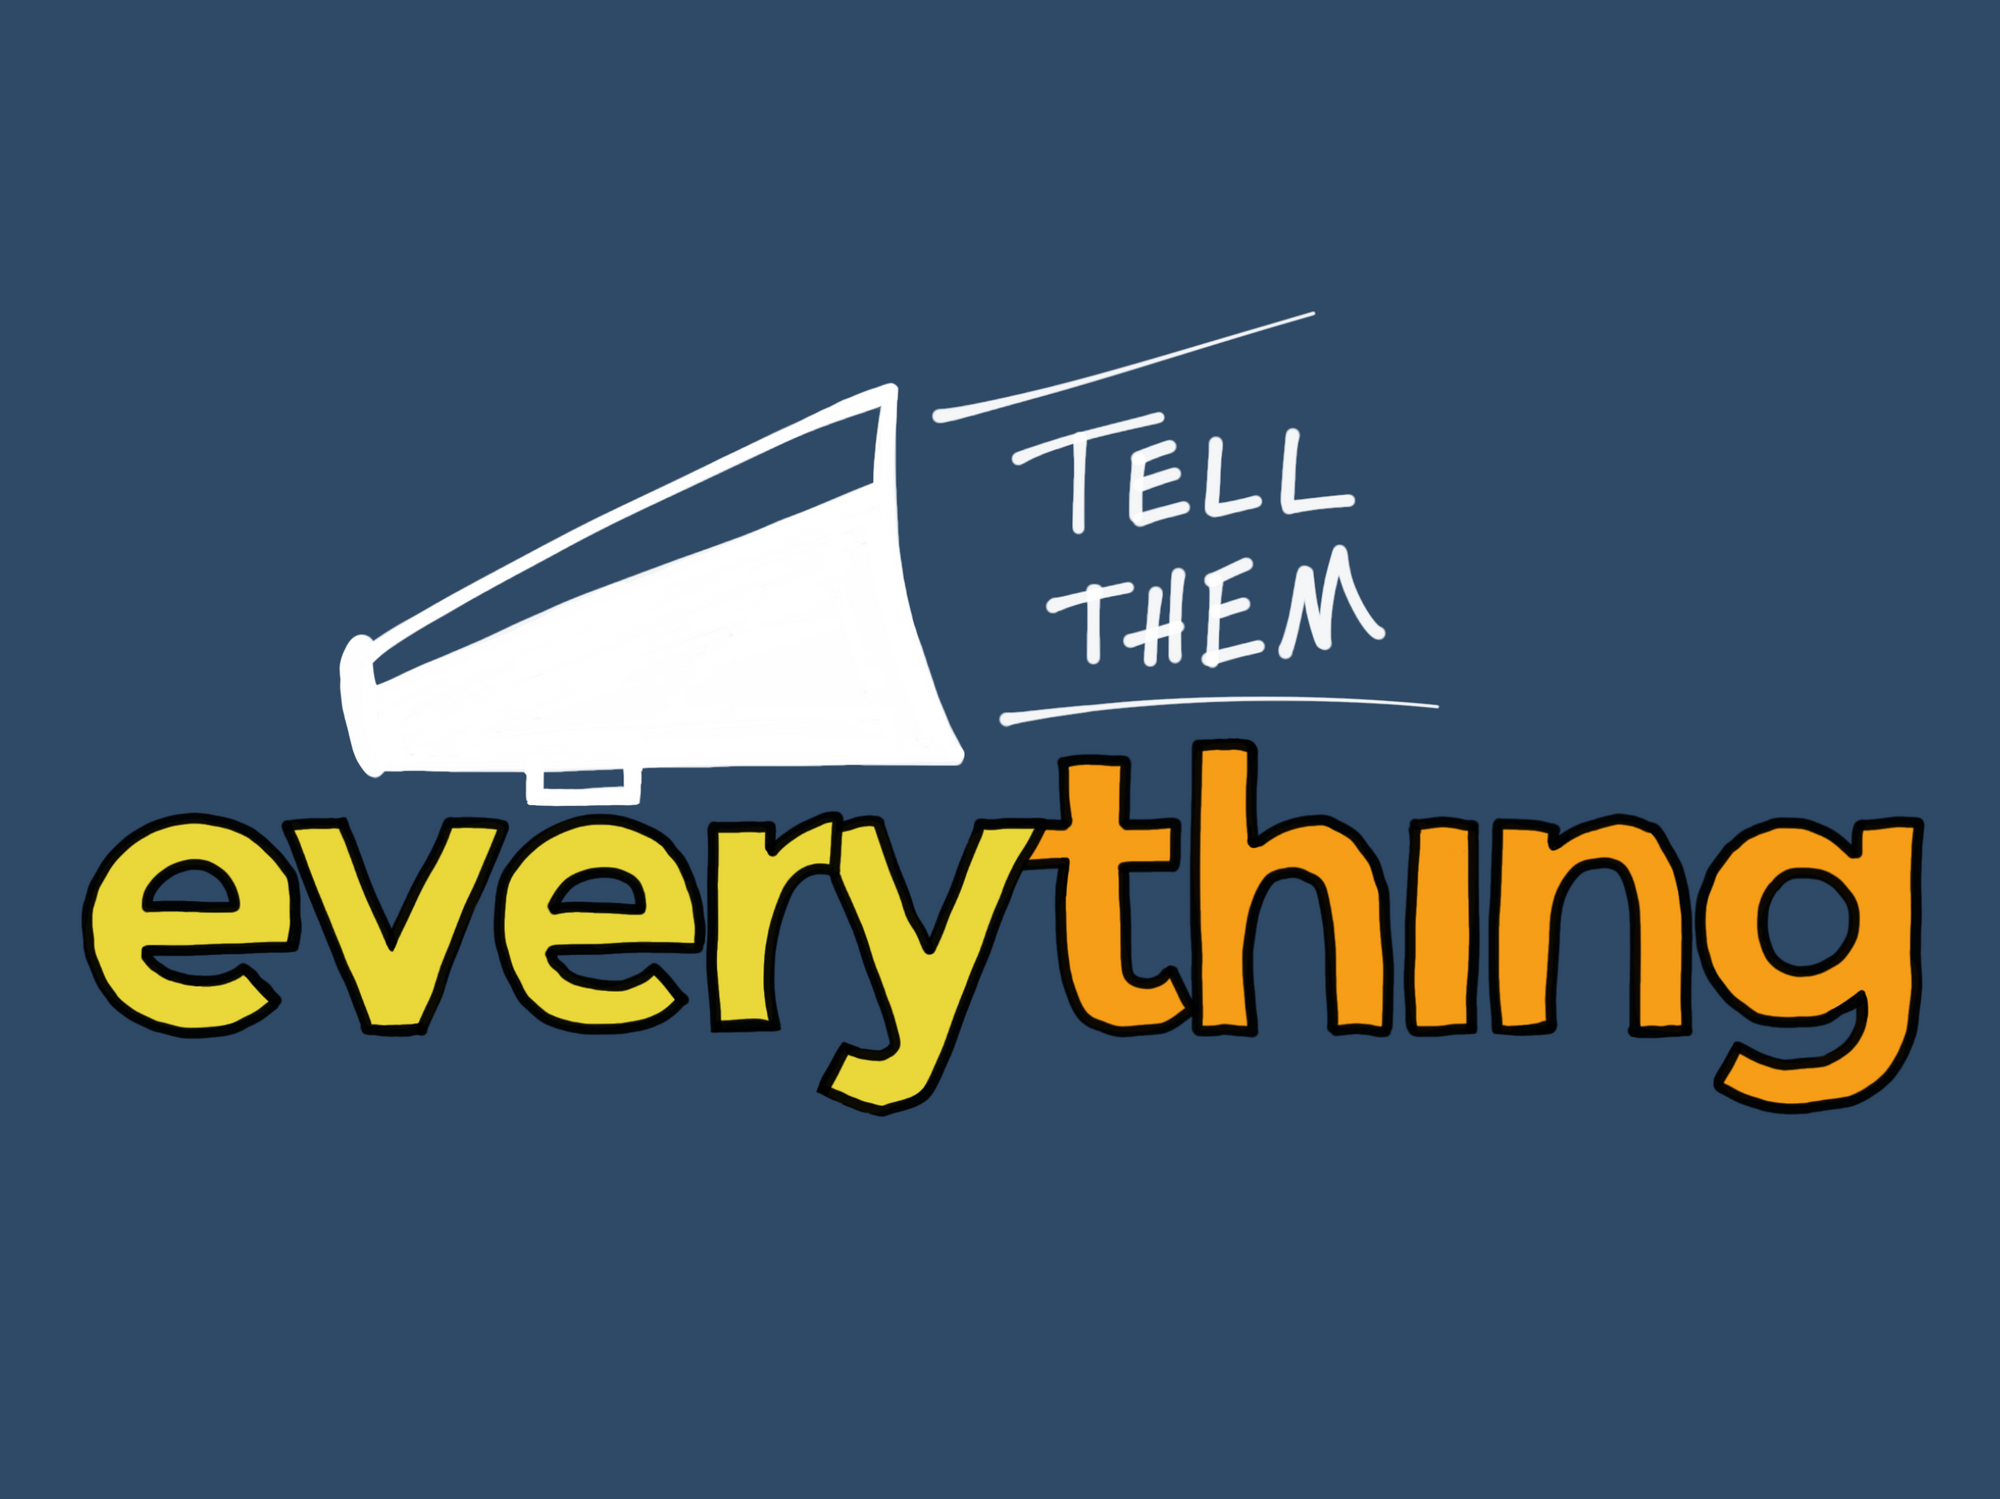 What is "Tell Them Everything"?